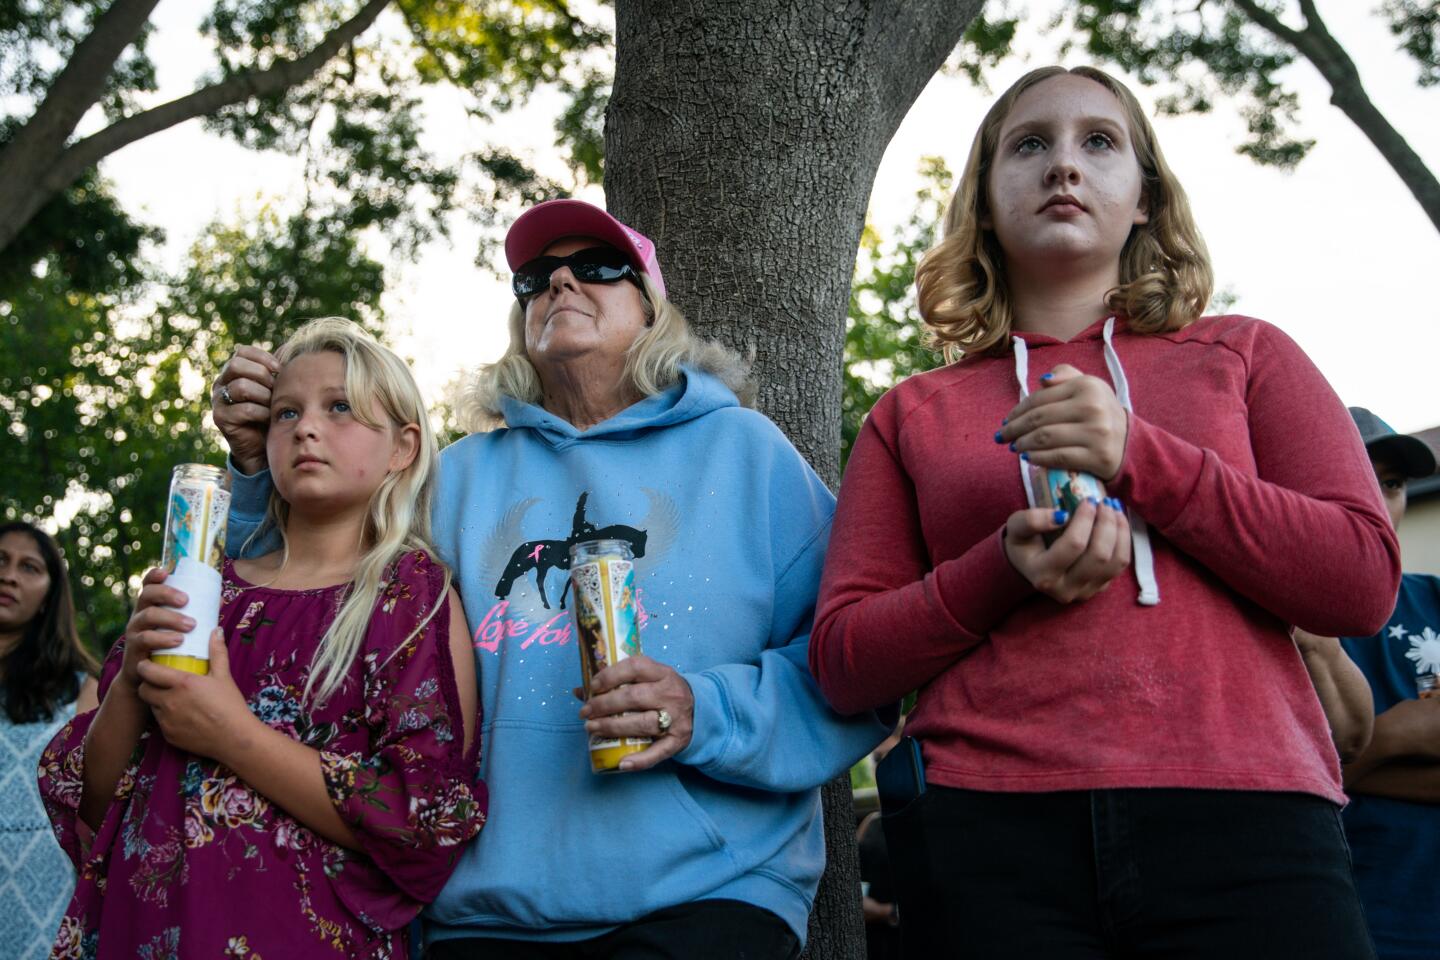 Madison Ferchette, 10, her grandmother, Laurie Ferchette, 69, and Julissa Frechette, 16, listen to speakers during a candlelight vigil at Gilroy City Hall on Monday.